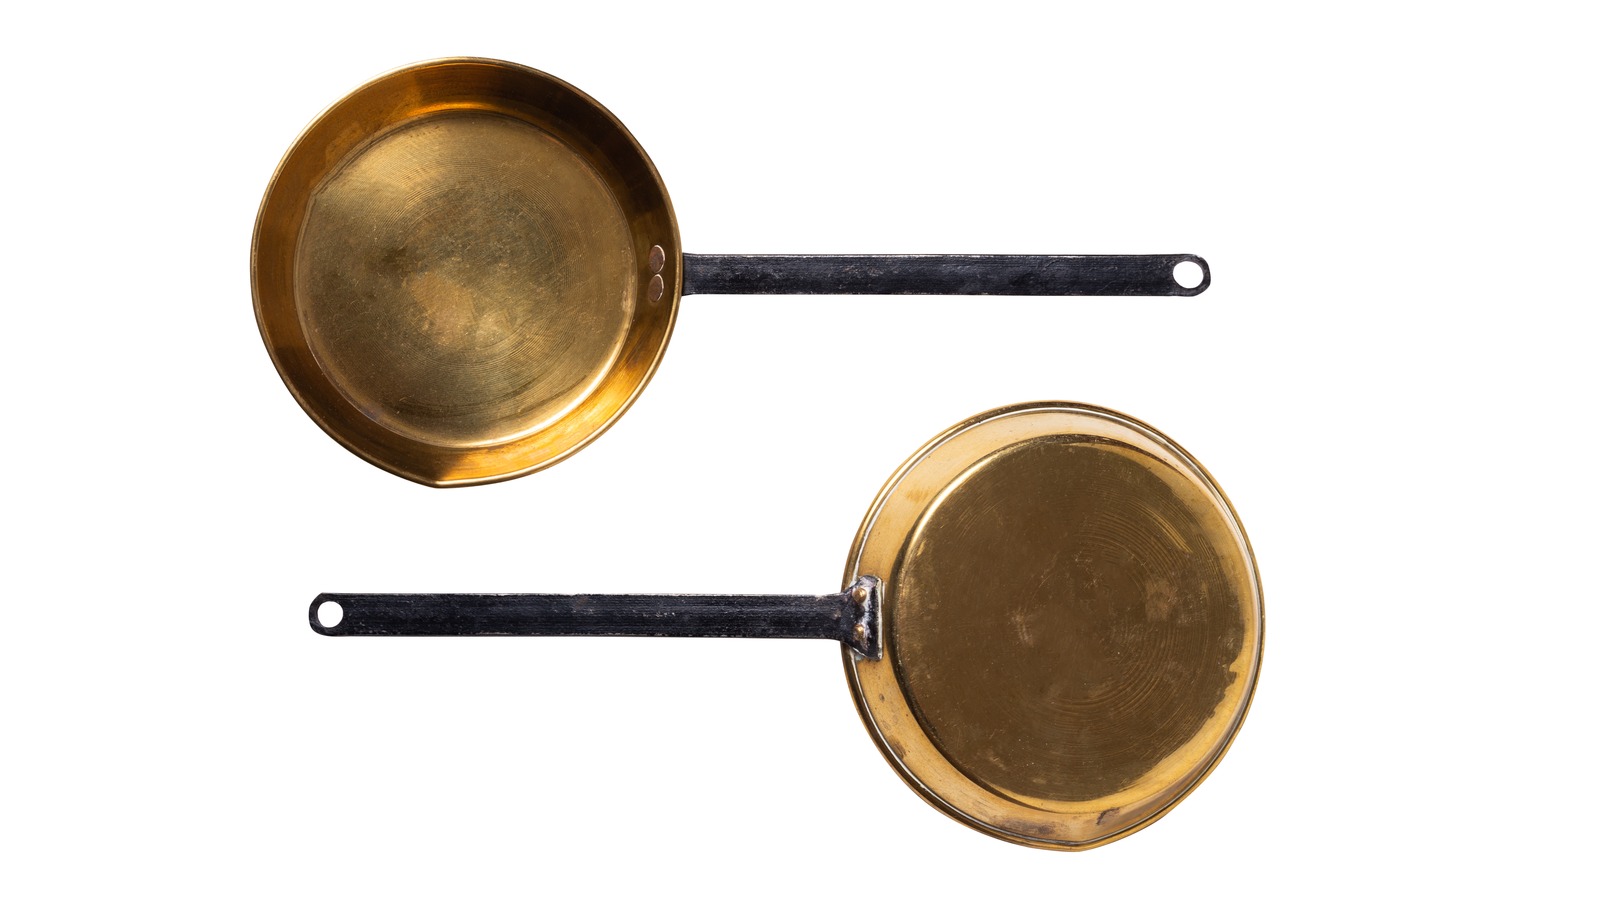 https://www.thedailymeal.com/img/gallery/the-efficient-way-to-clean-brass-pans-and-make-them-shine/l-intro-1693337084.jpg